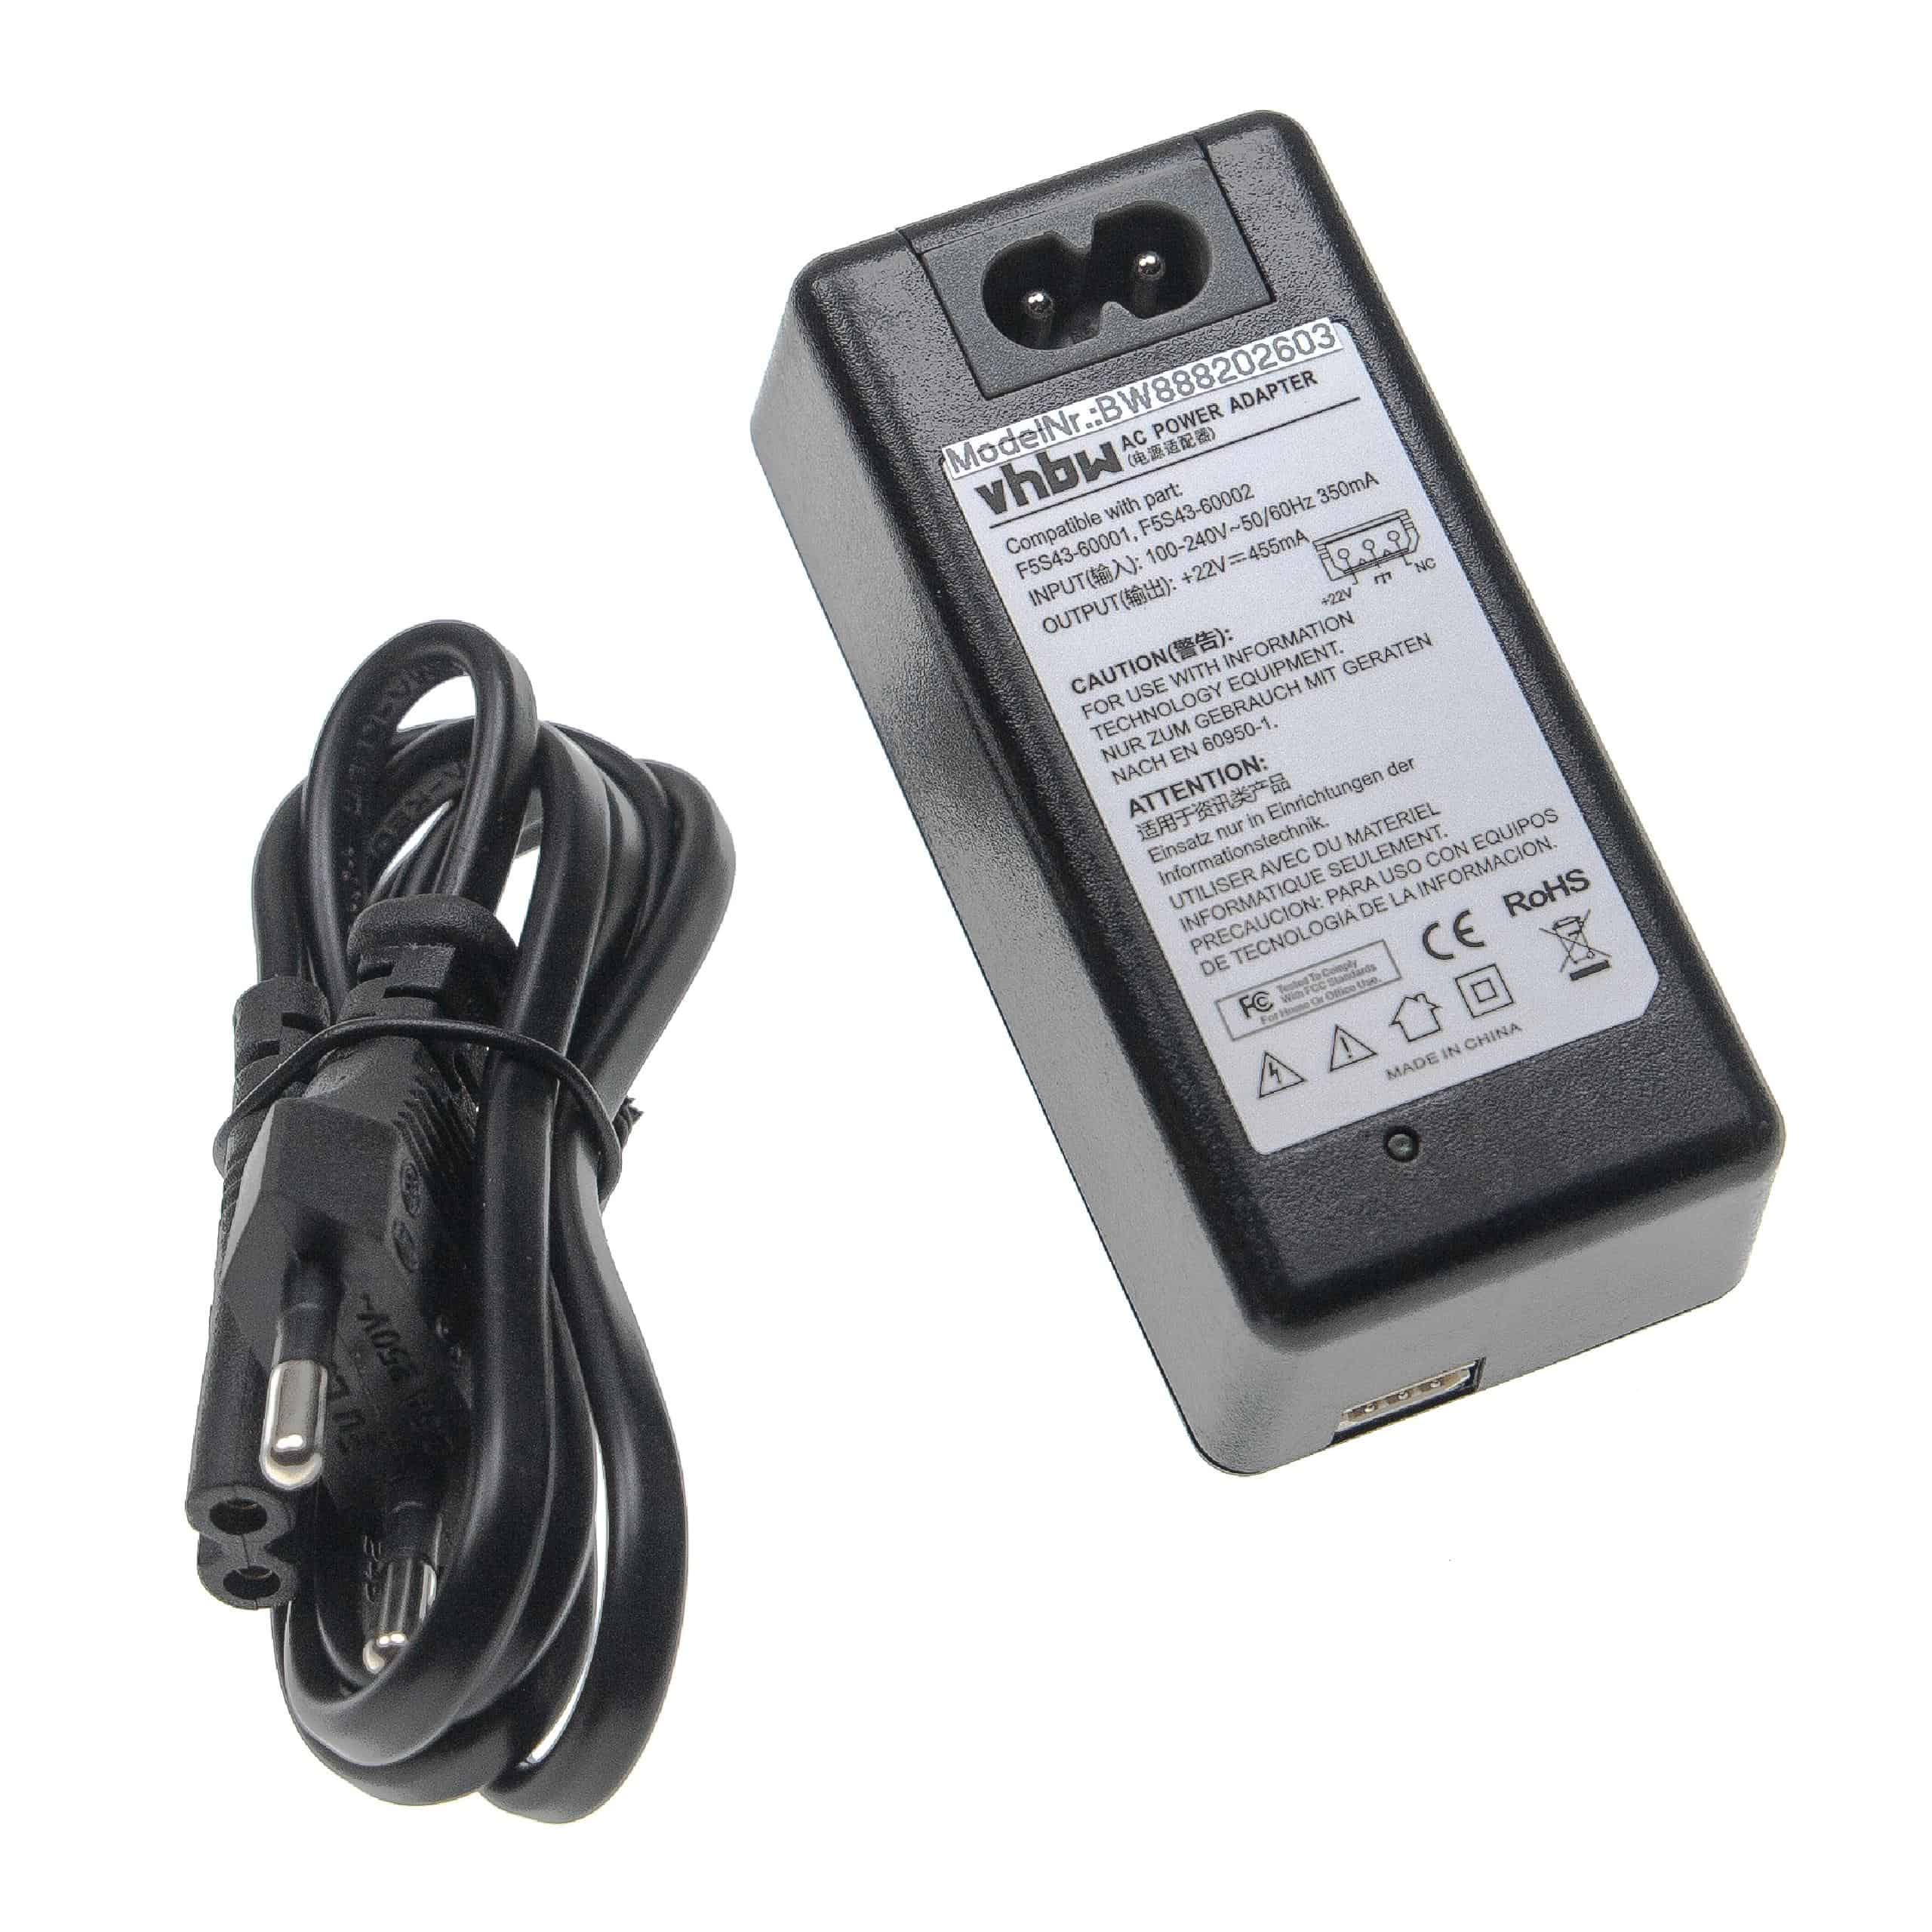 Mains Power Adapter replaces HP F5S43-60001, F5S43-60002 for Printer